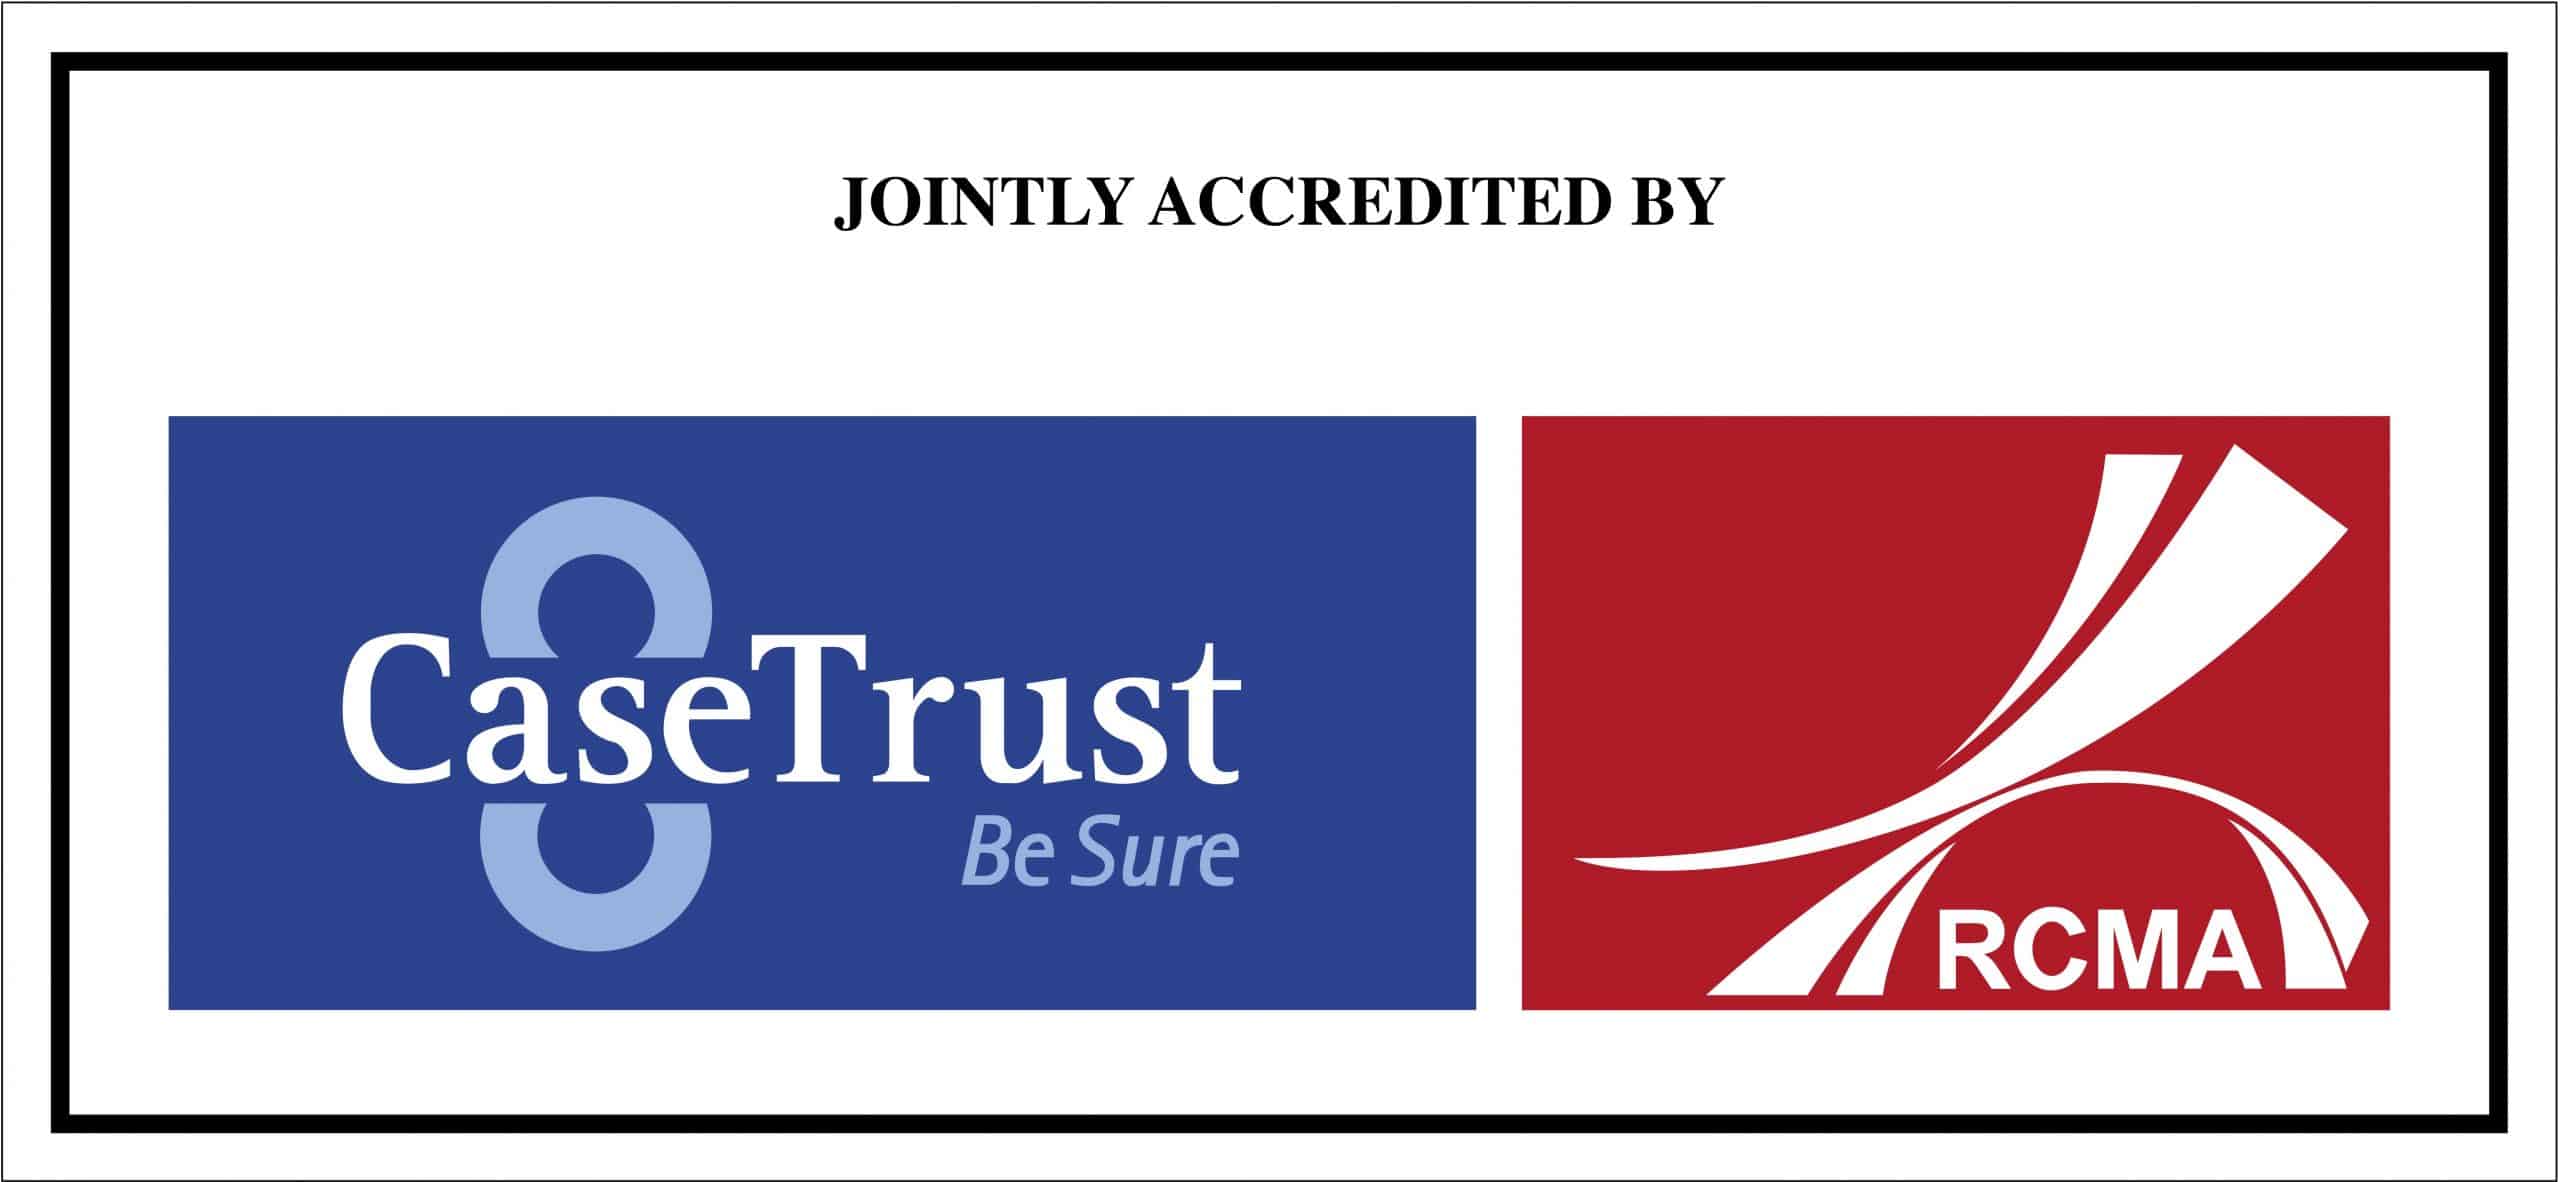 CaseTrust and RCMA joint accreditation